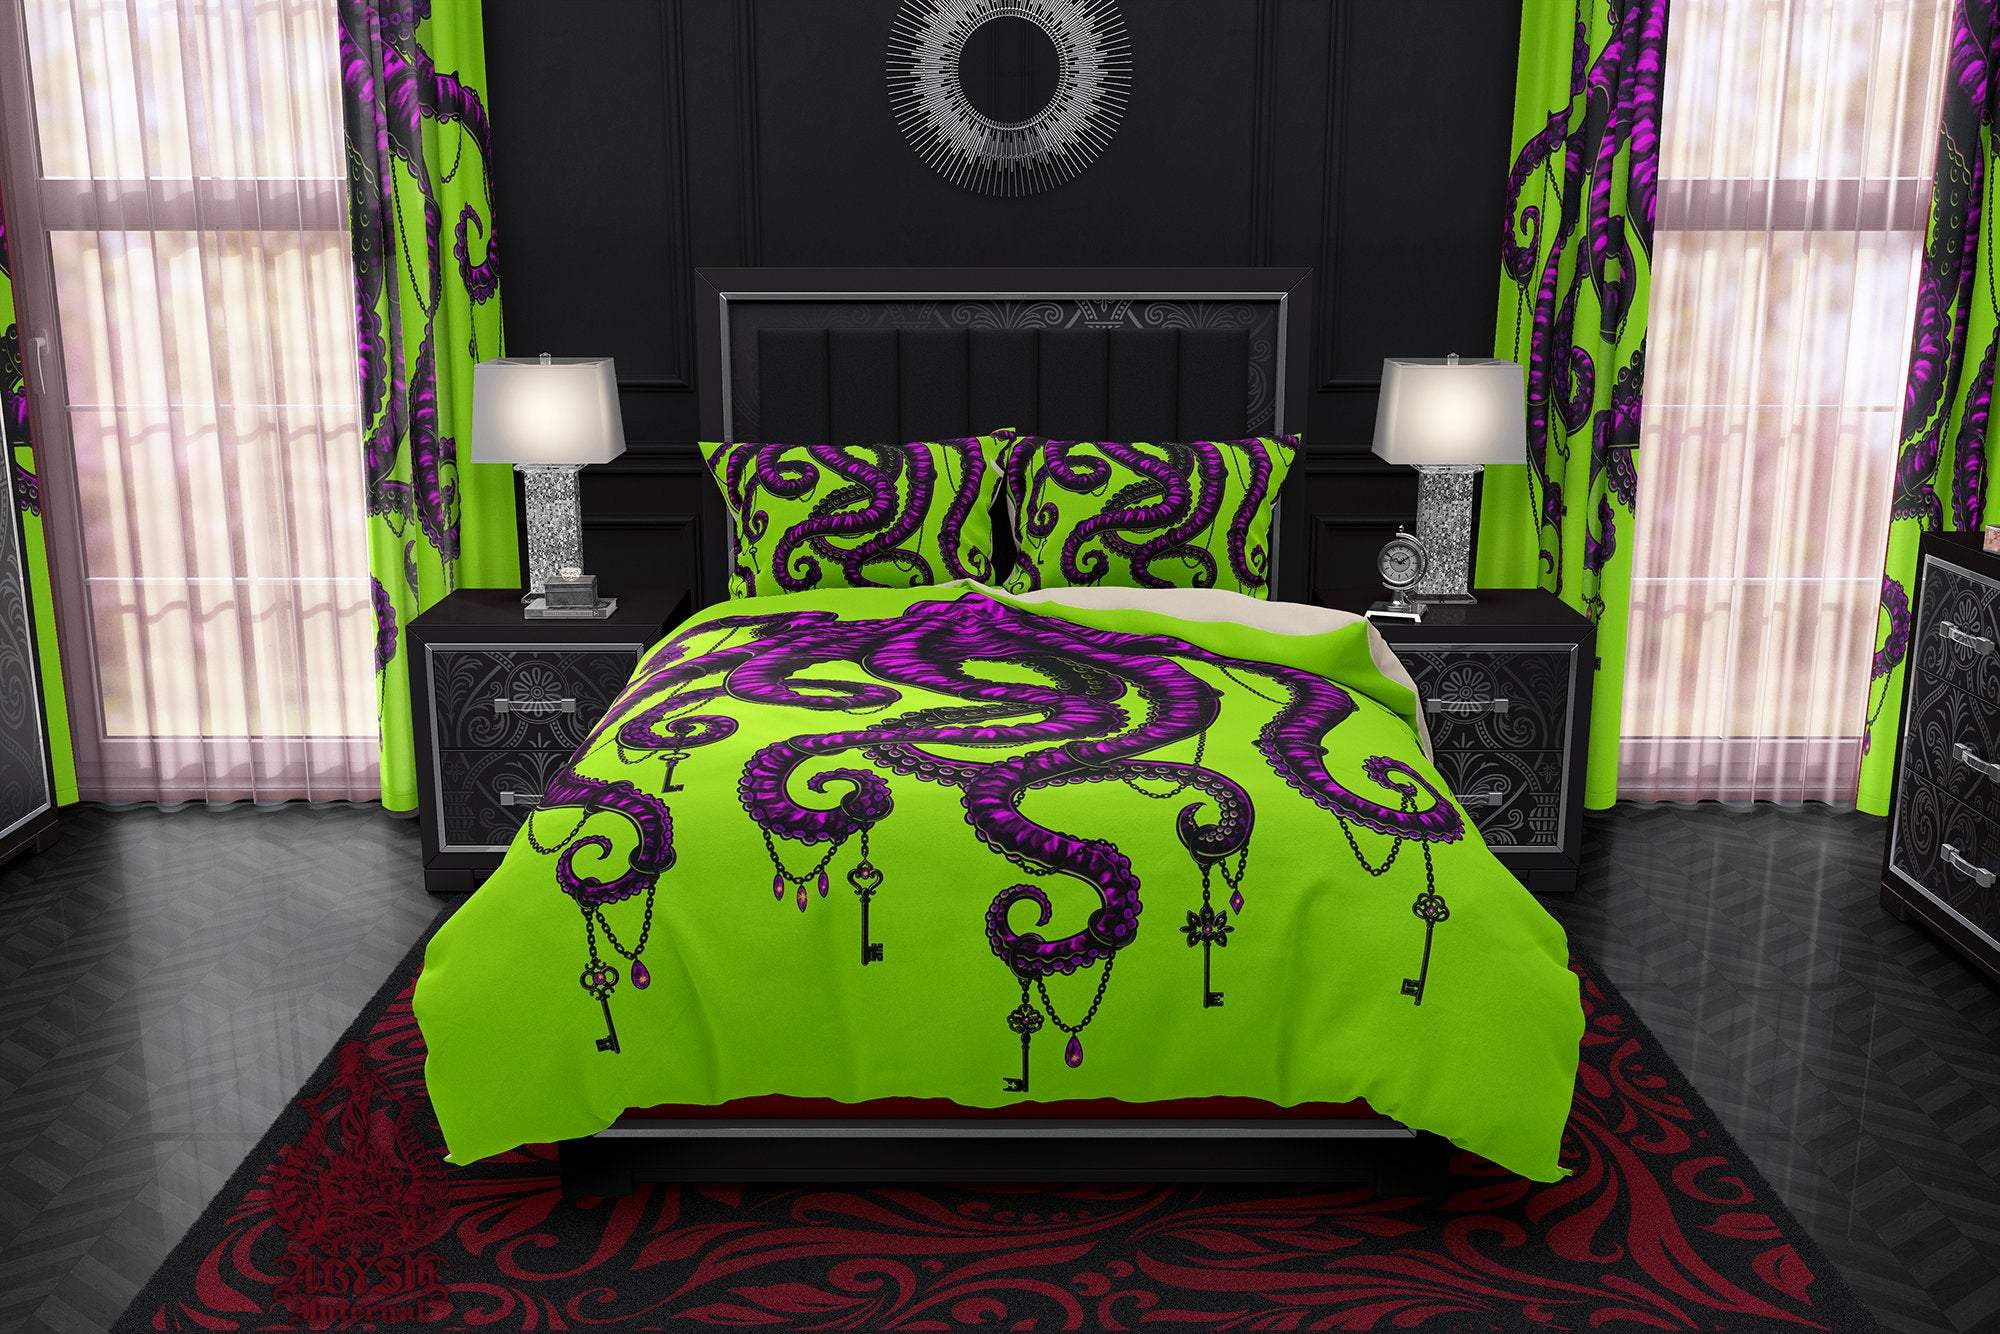 Octopus Bedding Set, Comforter and Duvet, Psychedelic Horror Bed Cover and Beach Bedroom Decor, King, Queen and Twin Size - Neon - Abysm Internal